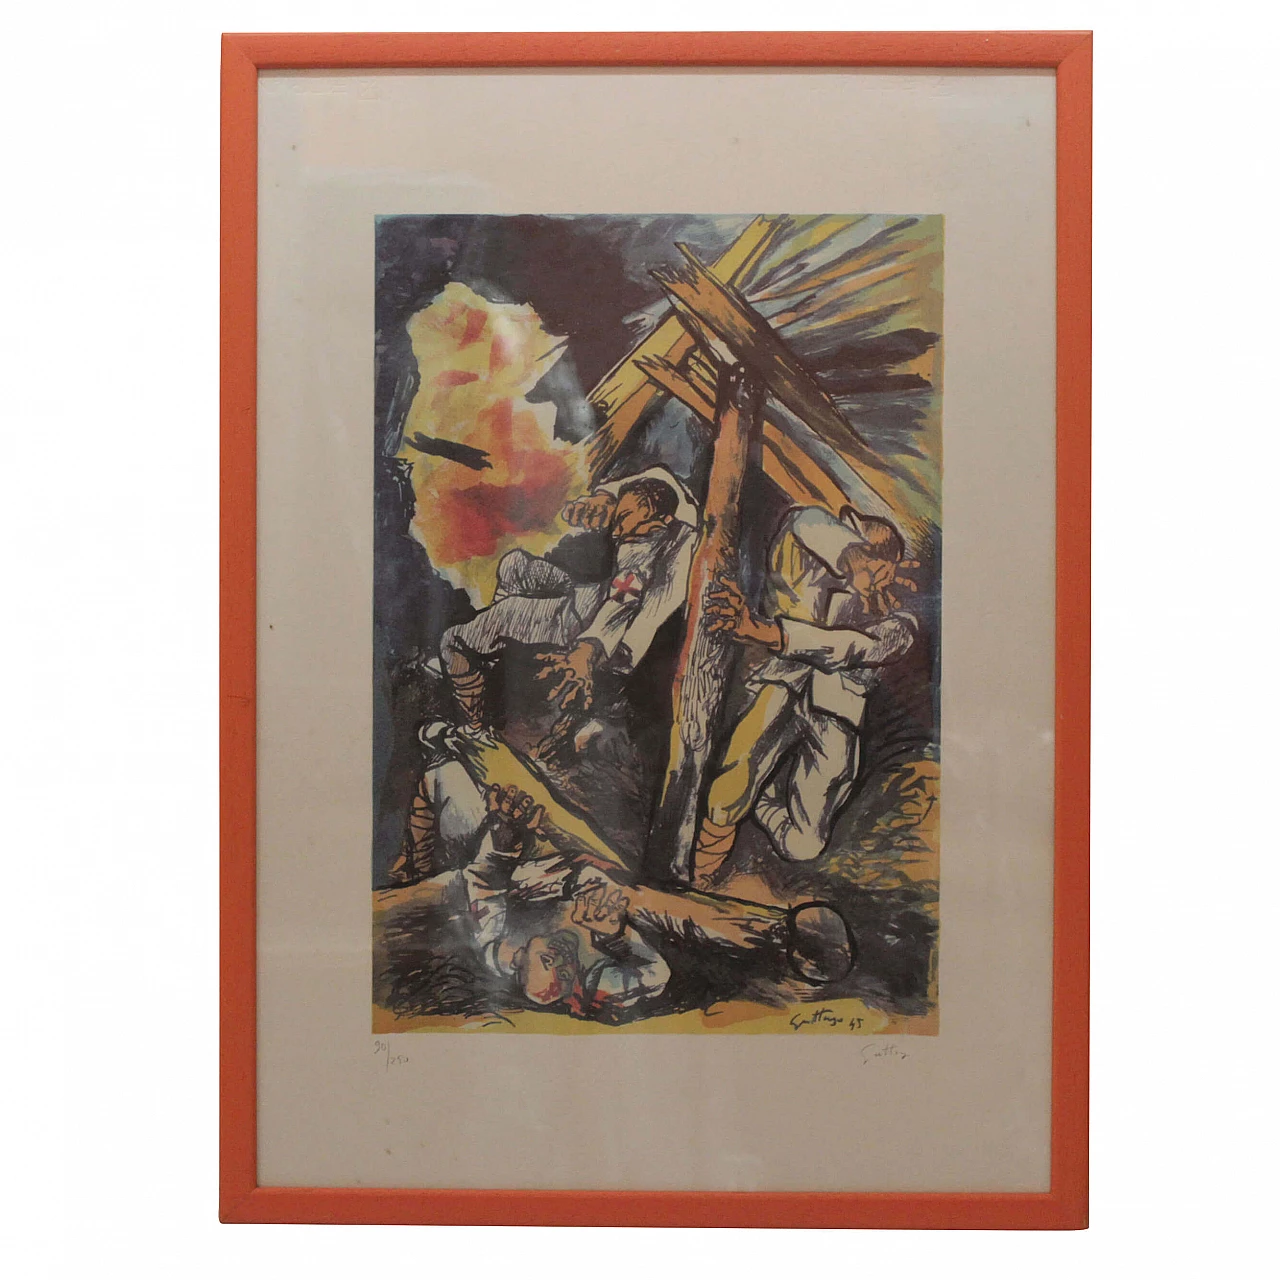 Set of 9 lithographs by Renato Guttuso Farewell to arms, 1940s, edition 90/250 1095296